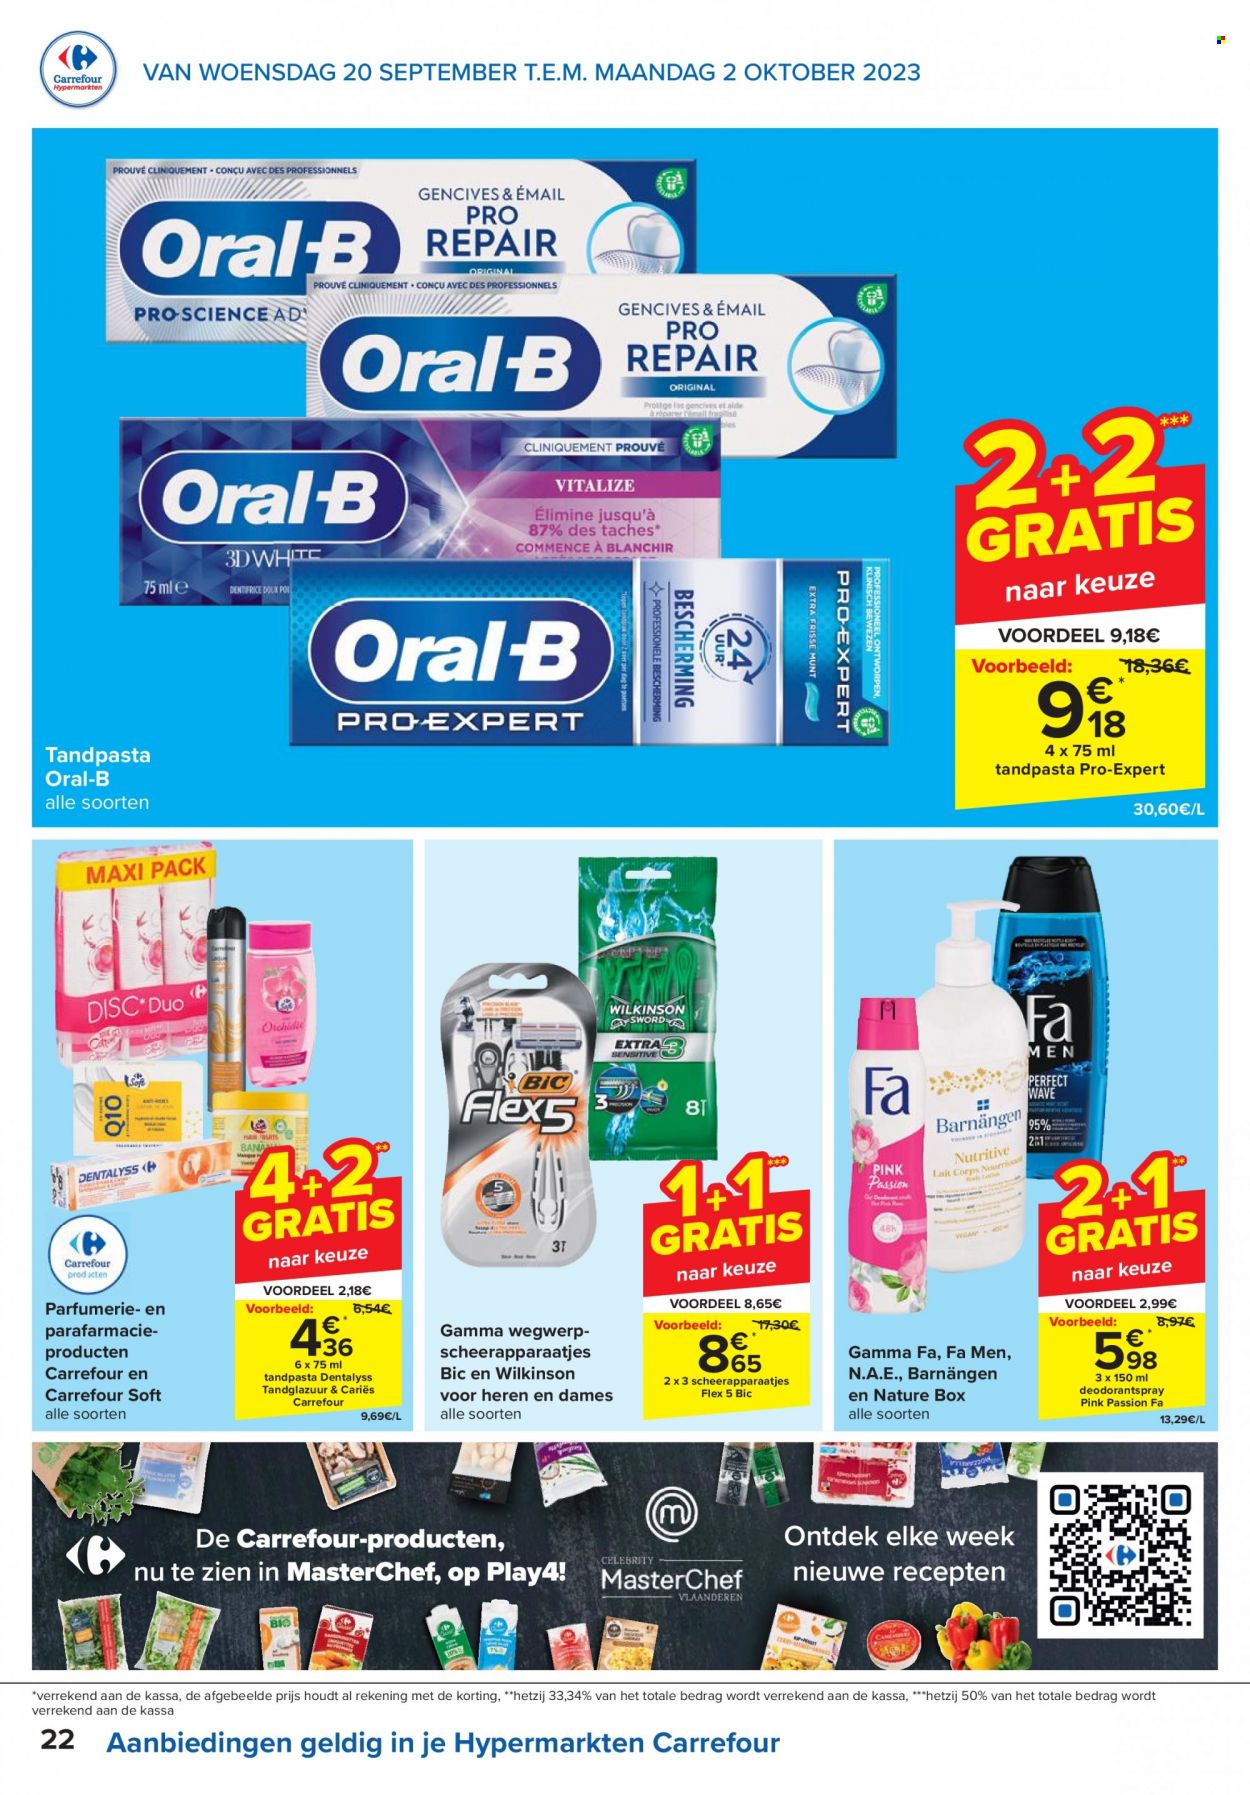 Catalogue Carrefour hypermarkt - 20.9.2023 - 2.10.2023. Page 22.